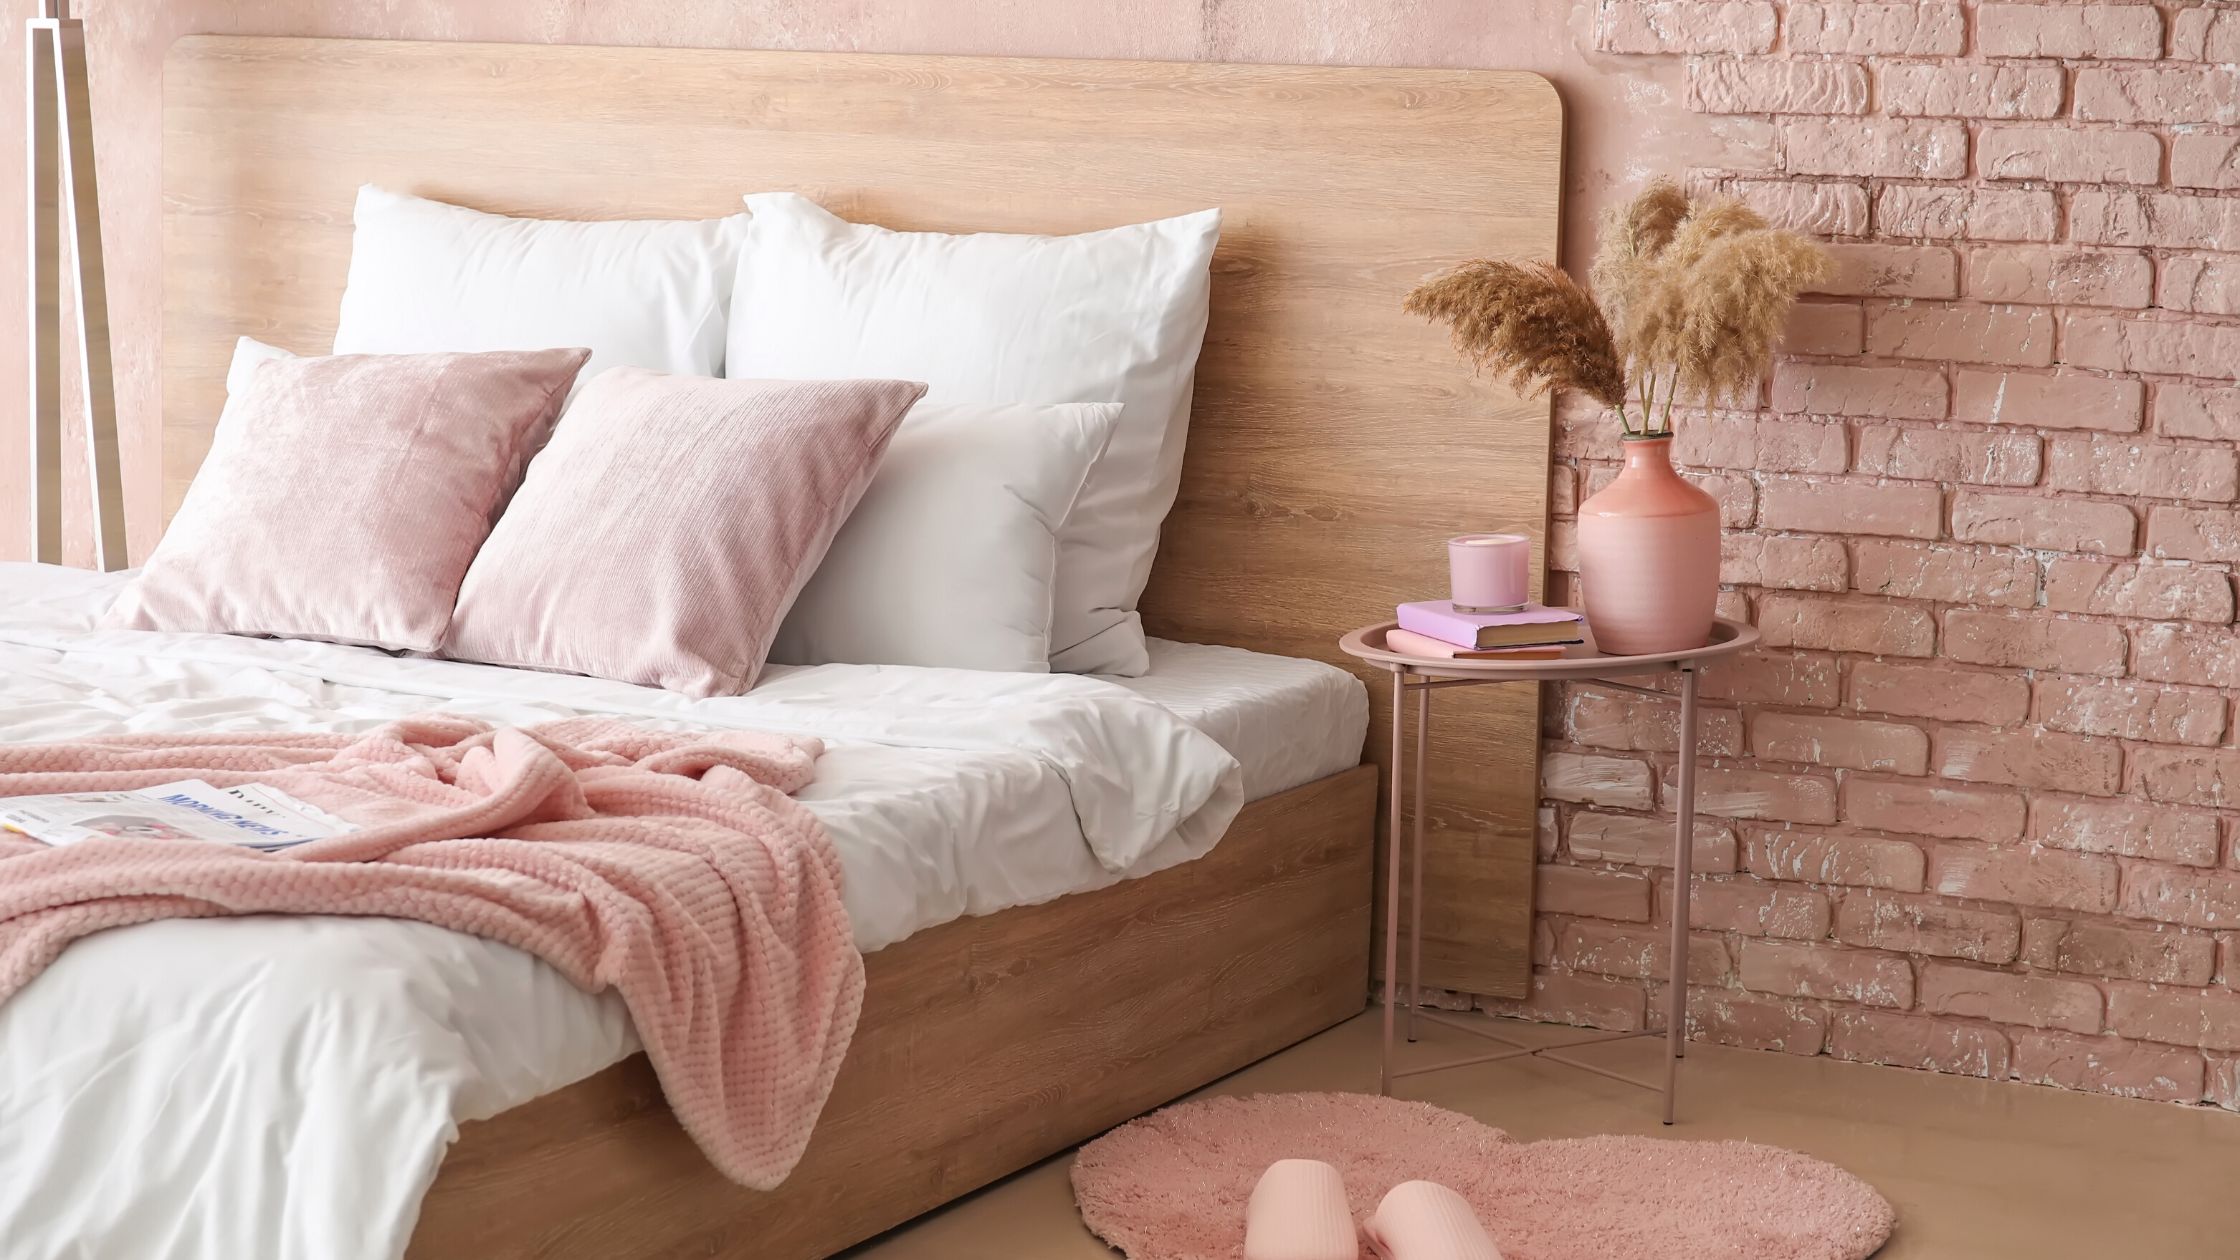 A romantic and organized master bedroom with dusty pink decor and linens.